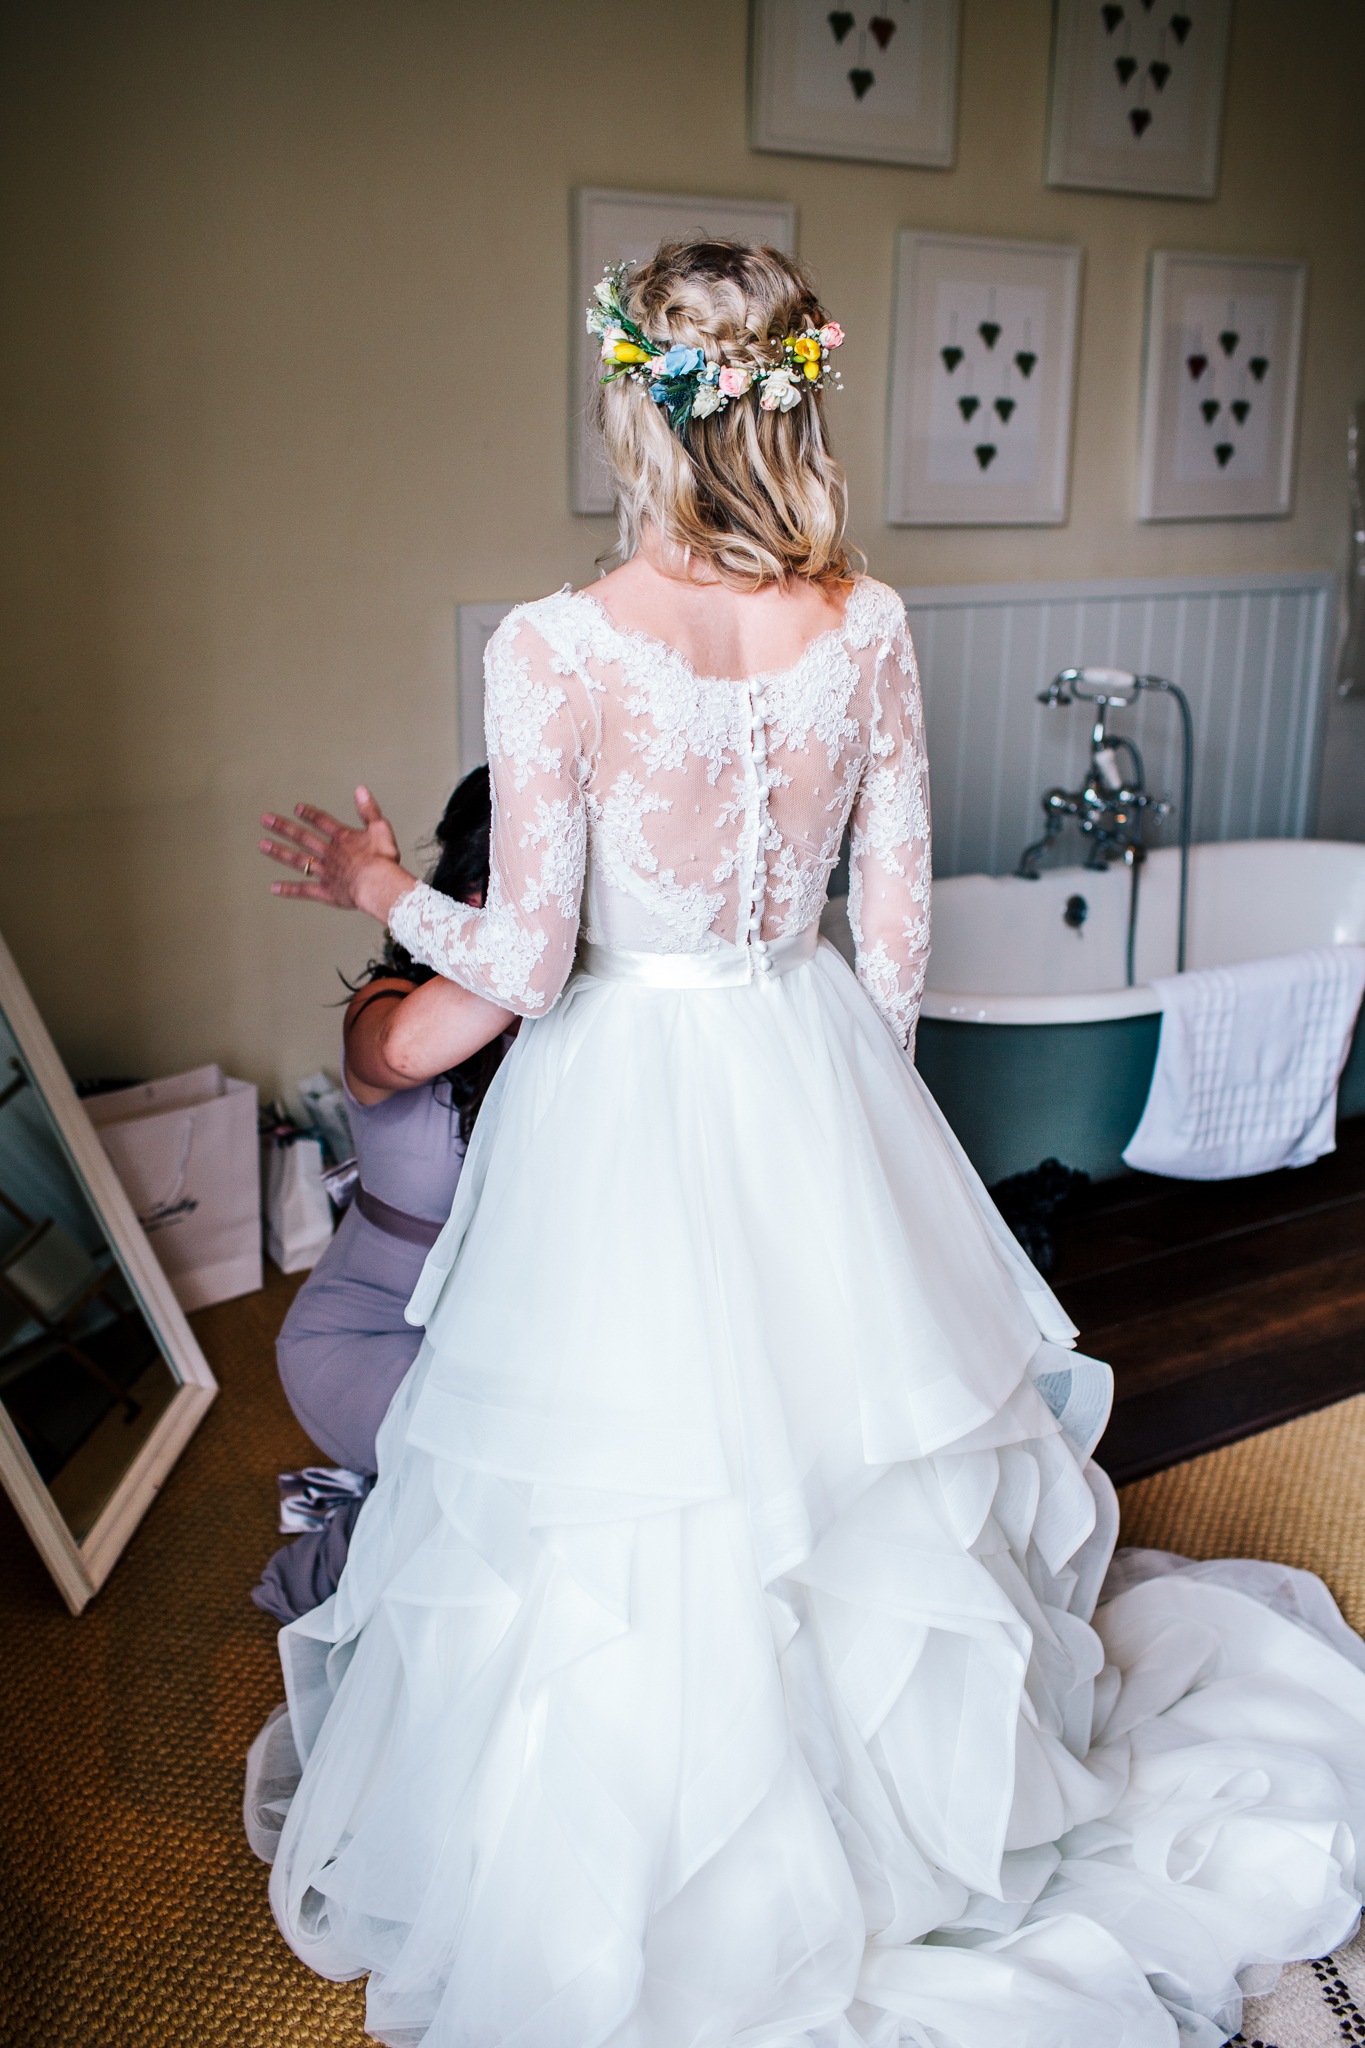 Bride wearing Emma Tindley separates of a lace top and layered skirt